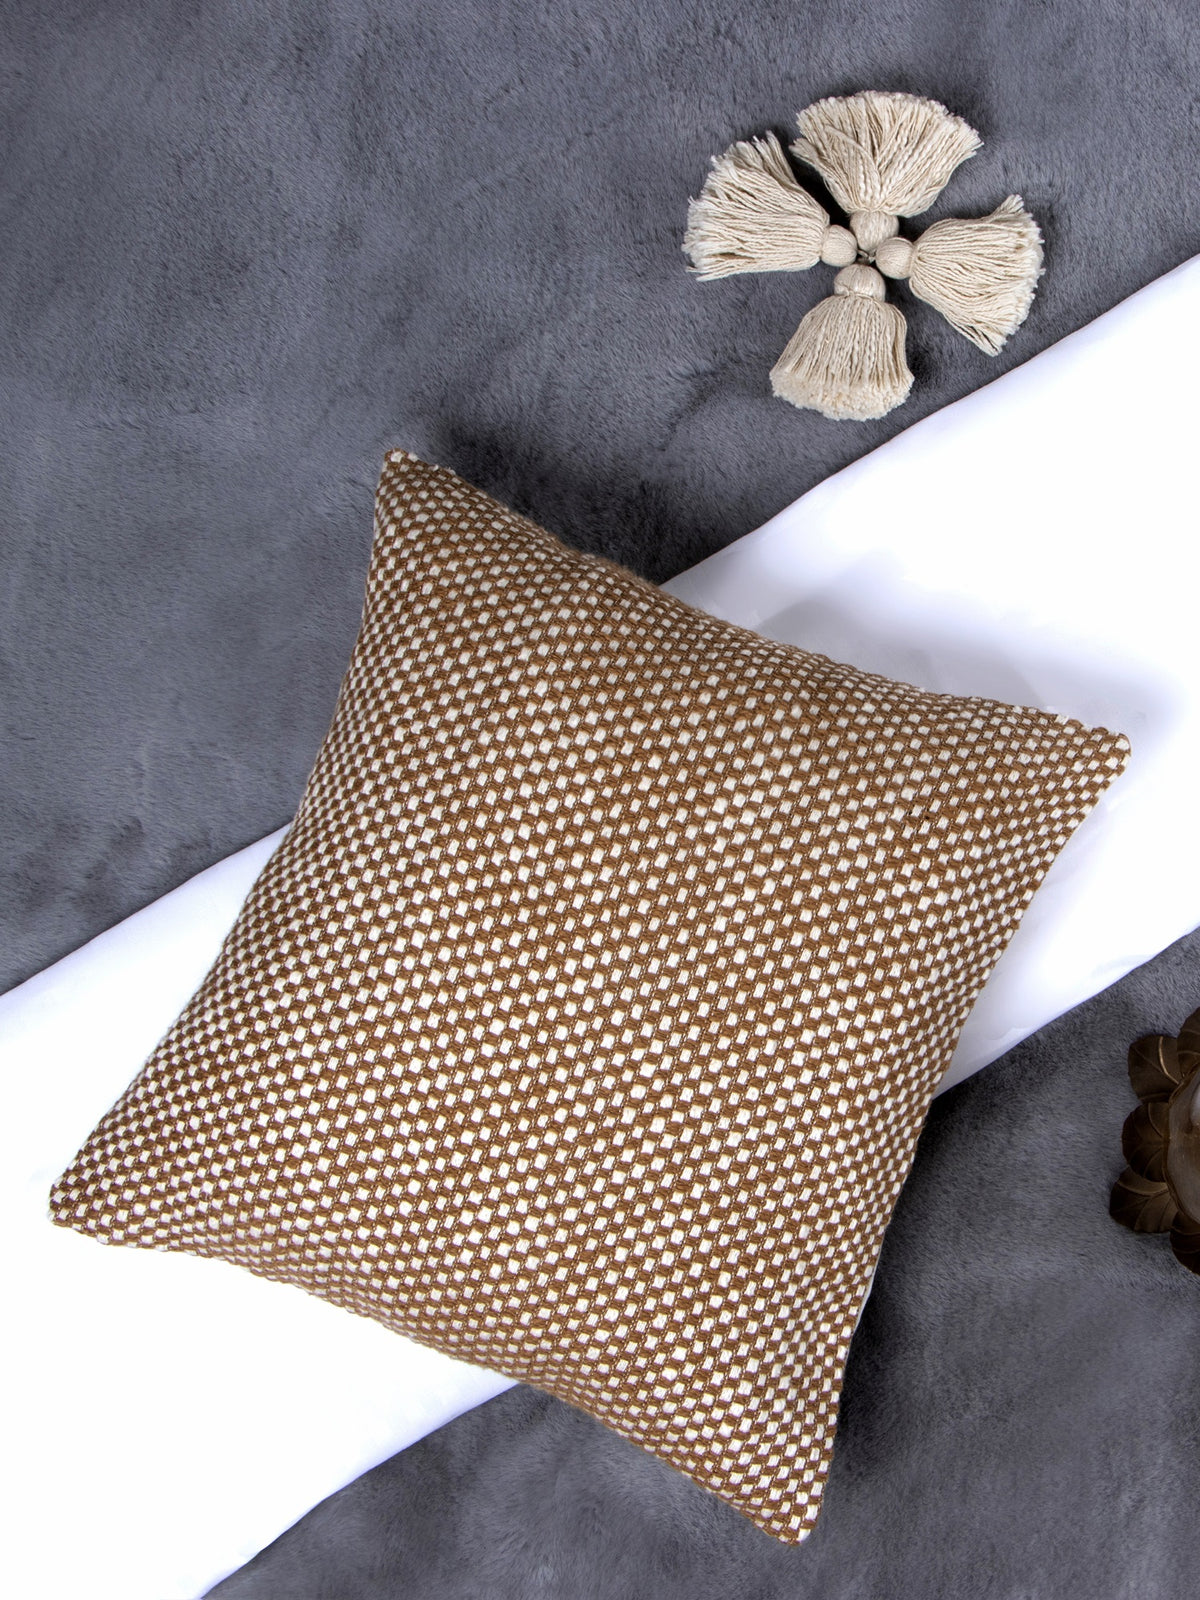 Basket Weave Pattern Cushion Covers Pack of 3